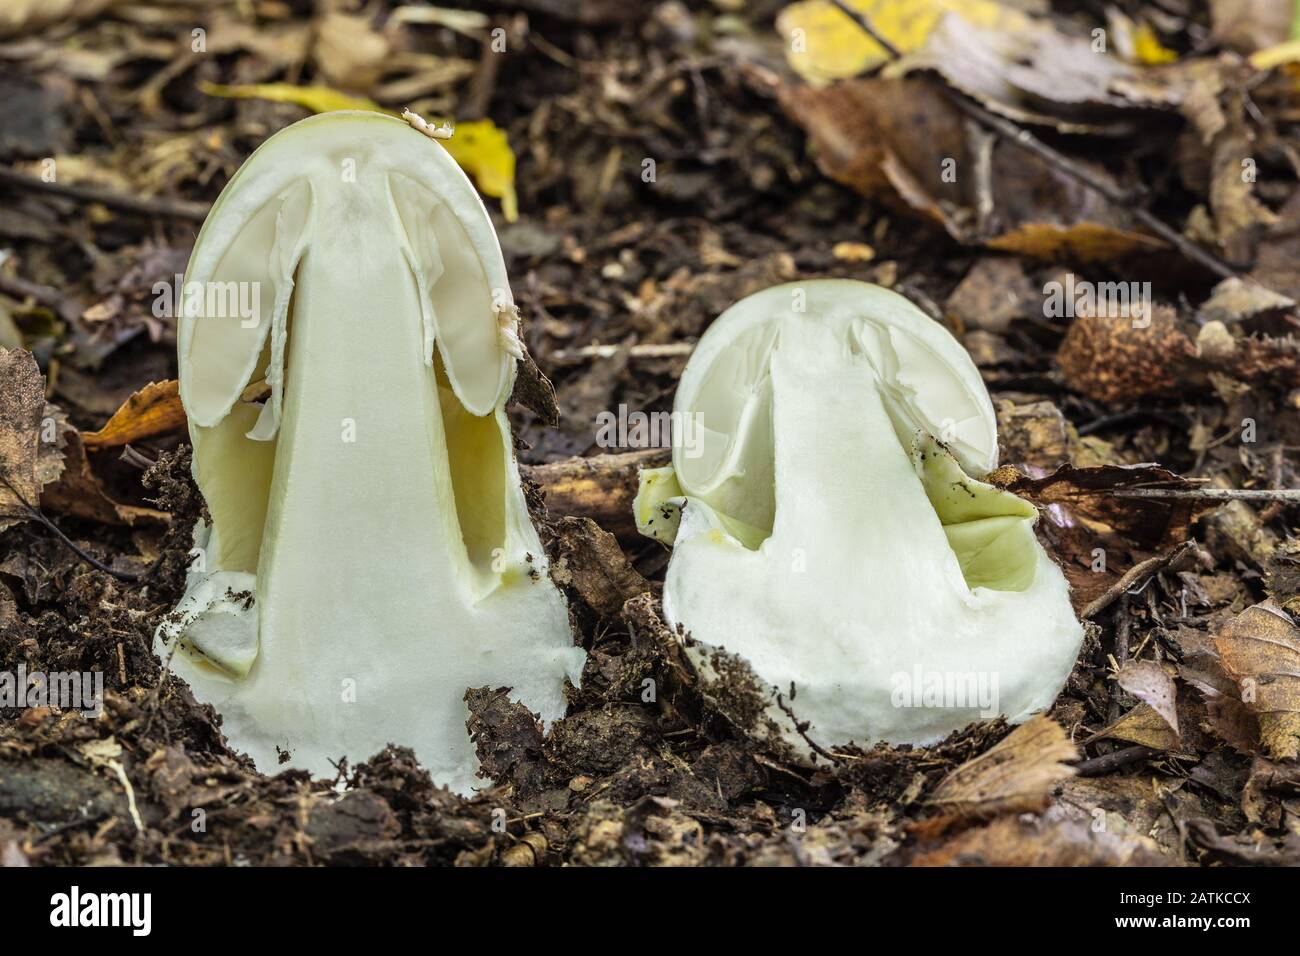 The deadly poisonous fungus Amanita phalloides grows in the forests of Central Europe. Stock Photo